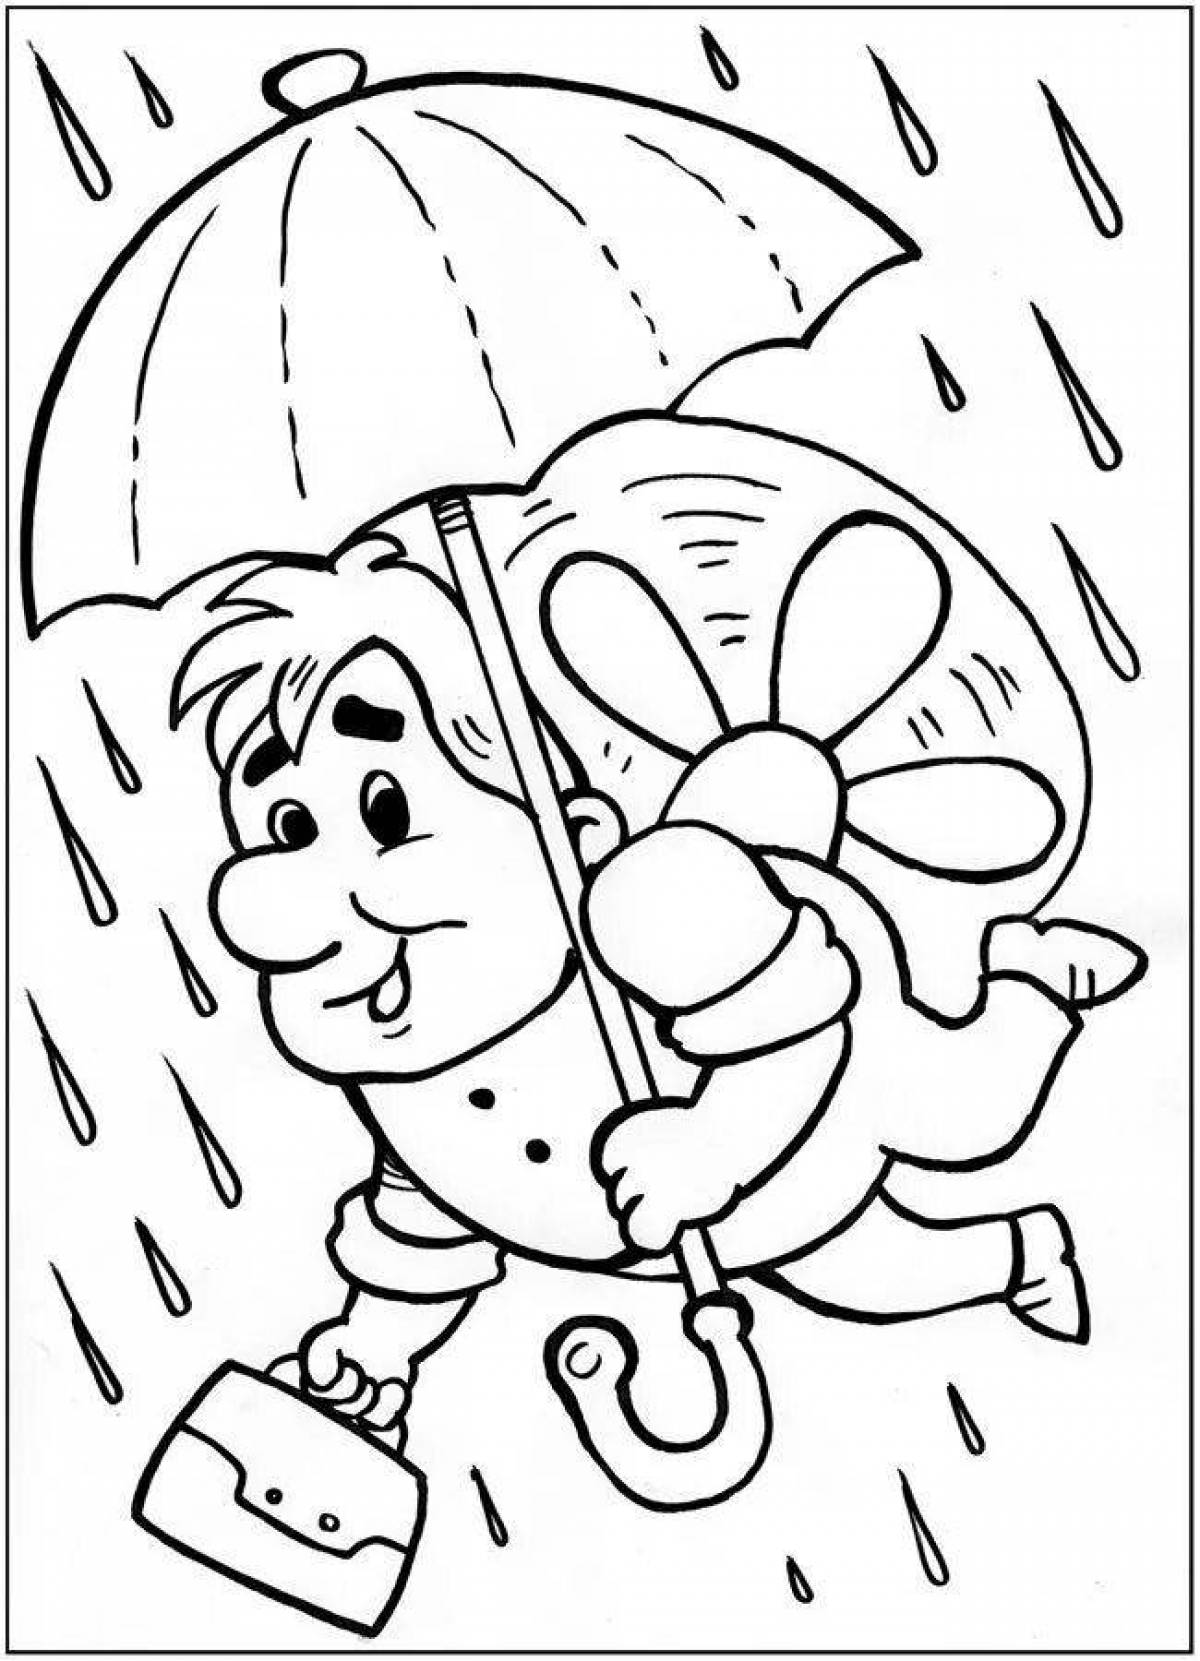 A fascinating collection of coloring pages